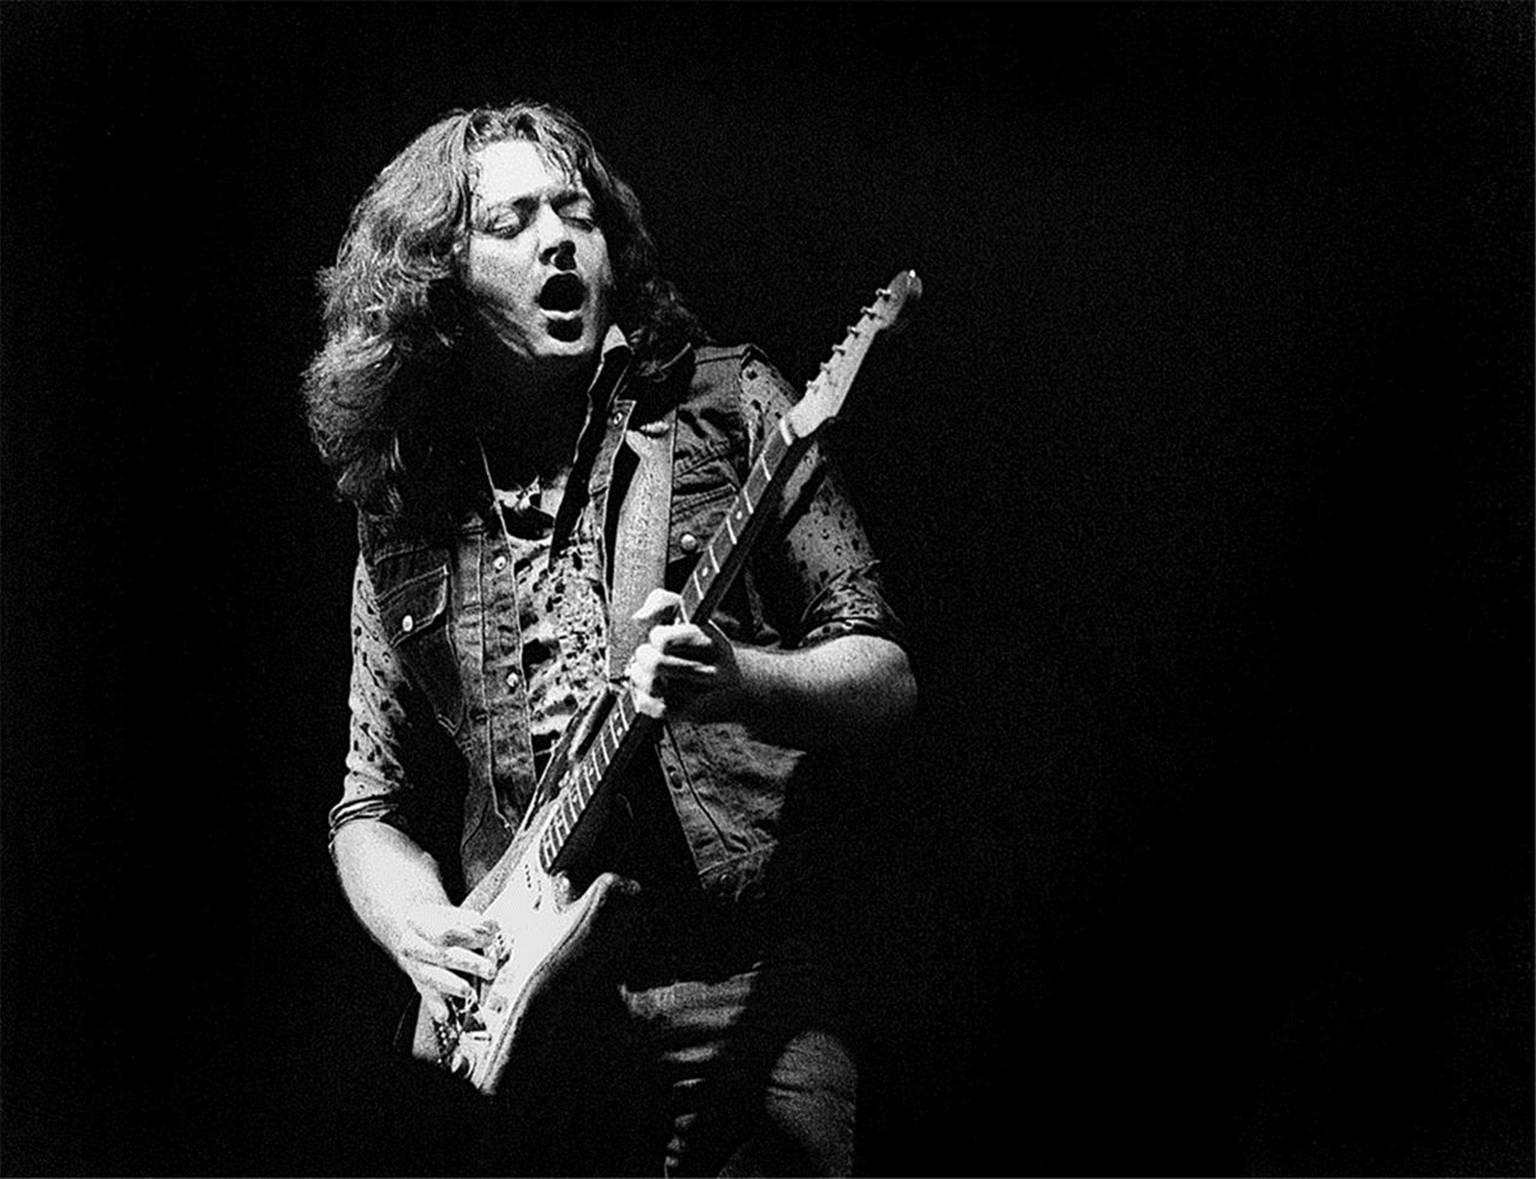 Black and White Photograph Colm Henry - Rory Gallagher, Dublin, 1981